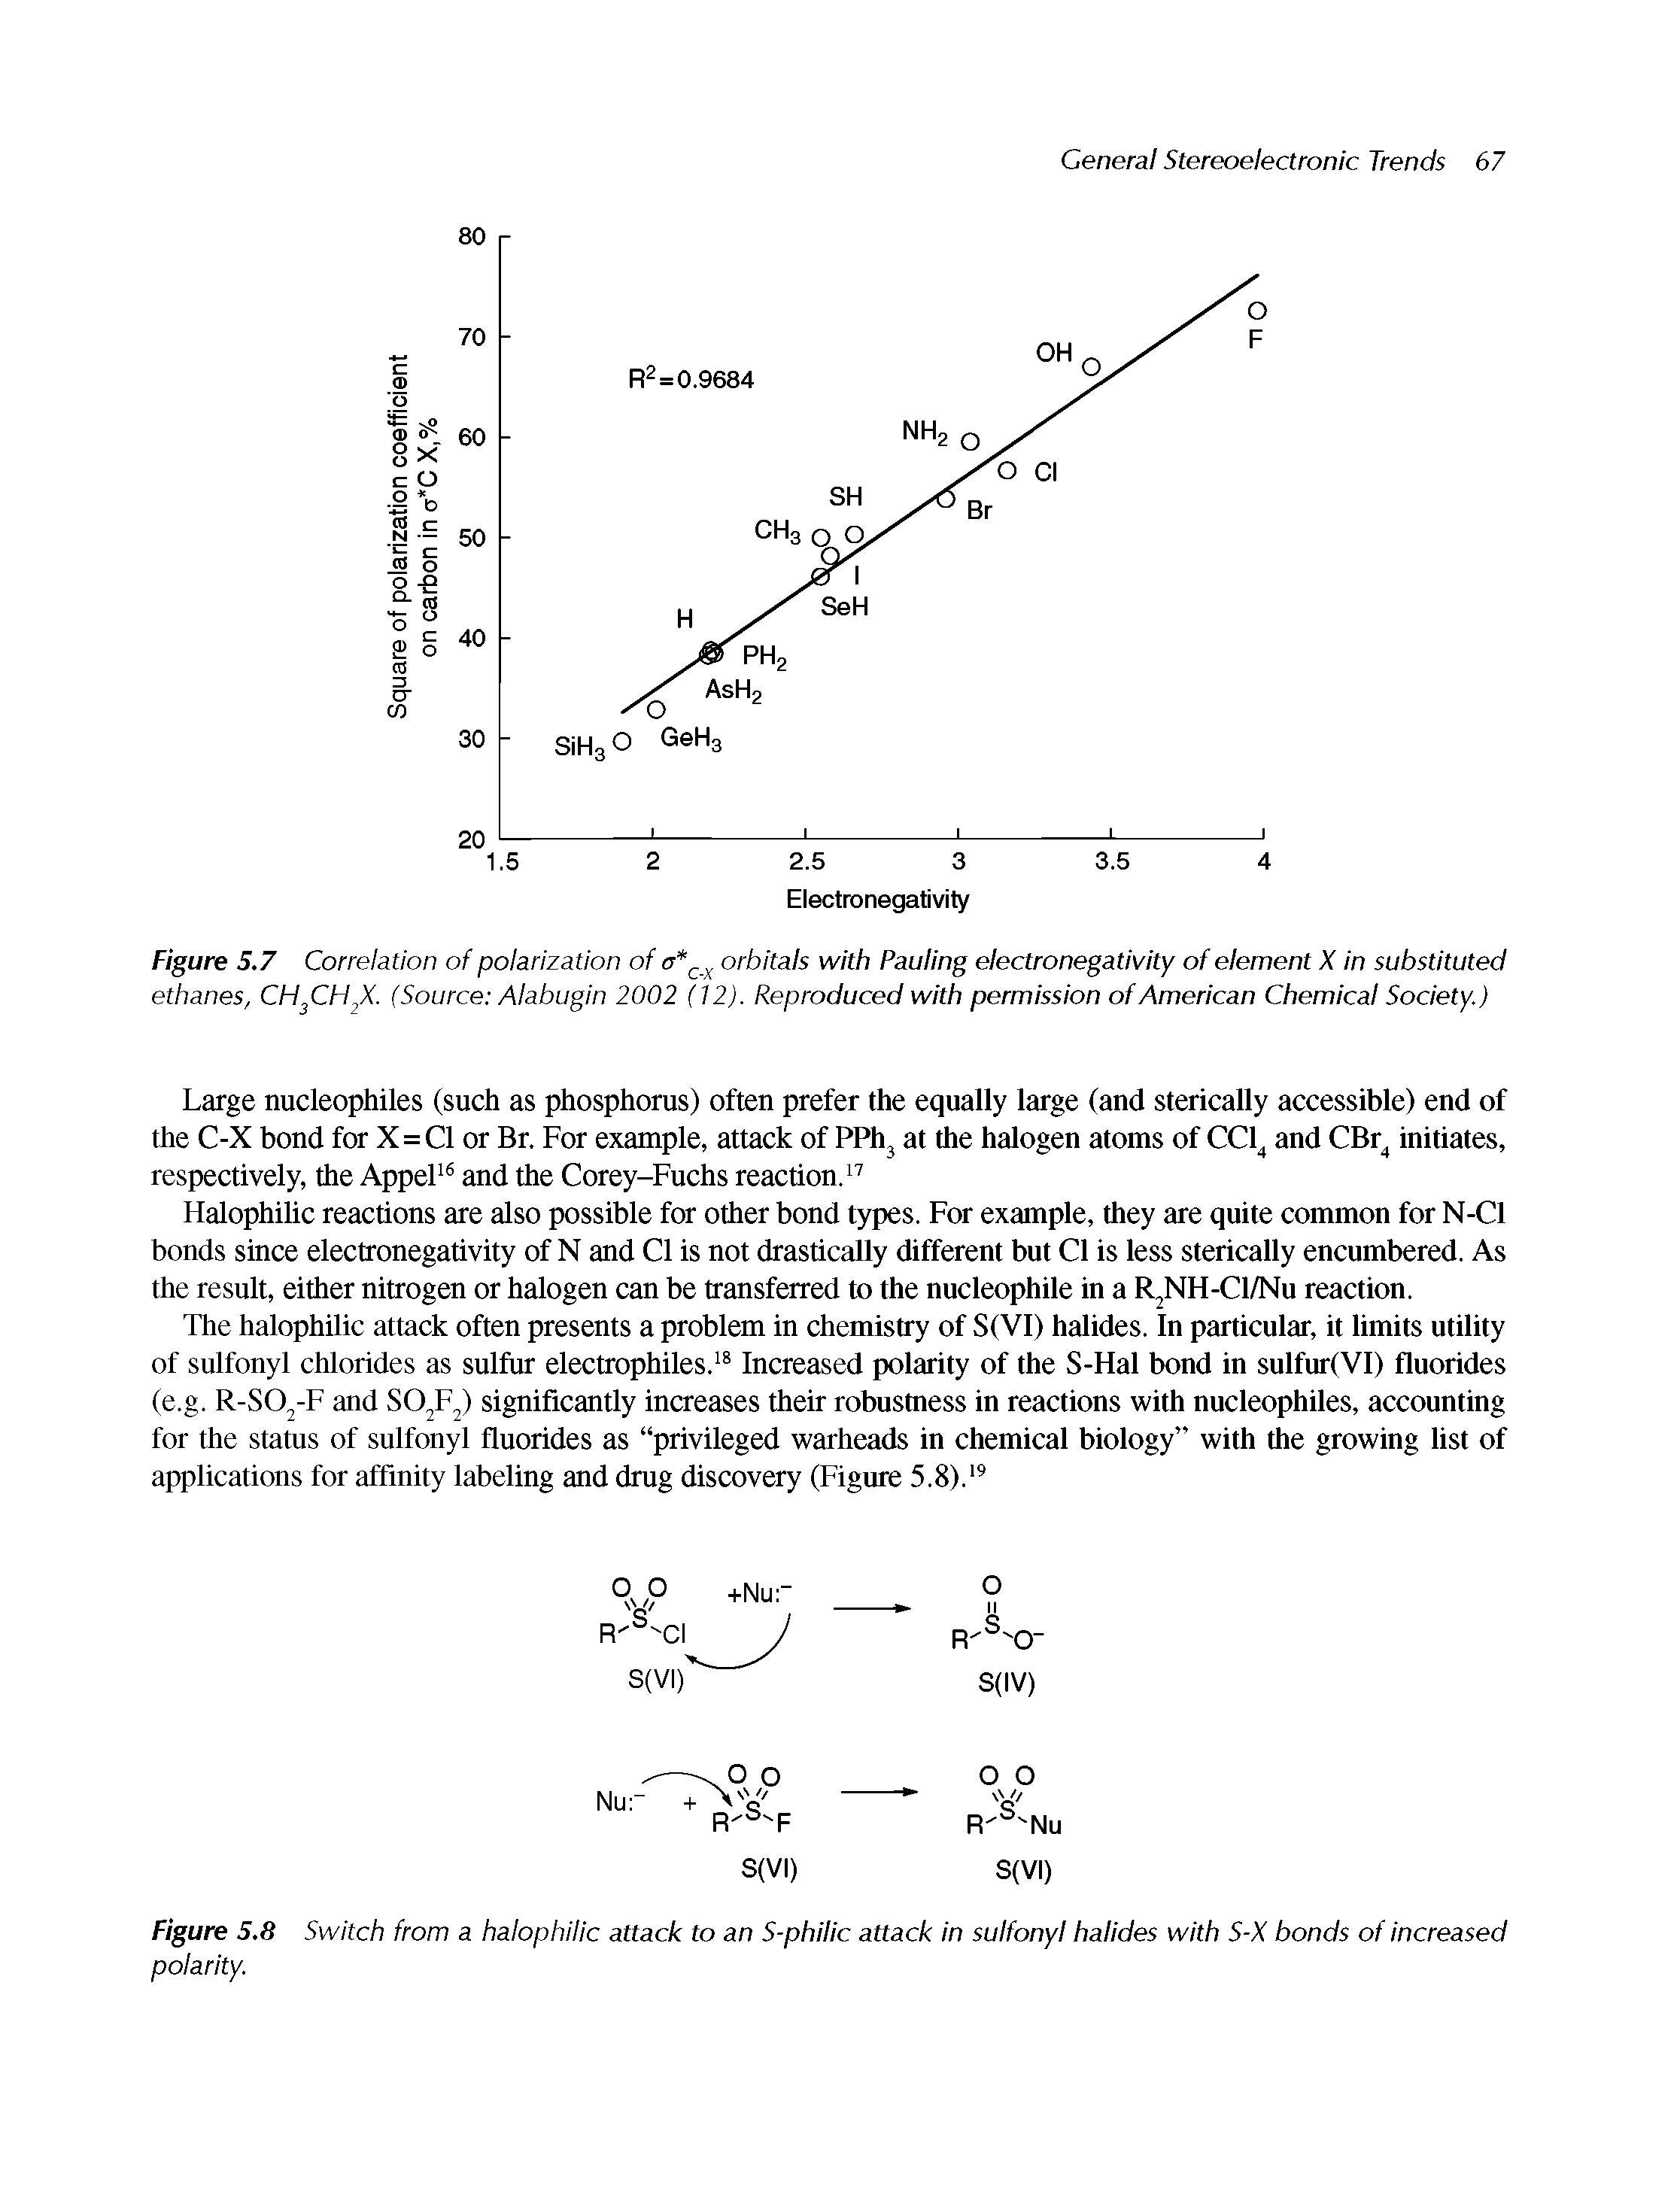 Figure 5.7 Correlation of polarization of orbitals with Pauling electronegativity of element X in substituted ethanes, CH CH X. (Source Alabugin 2002 (12). Reproduced with permission of American Chemical Society.)...